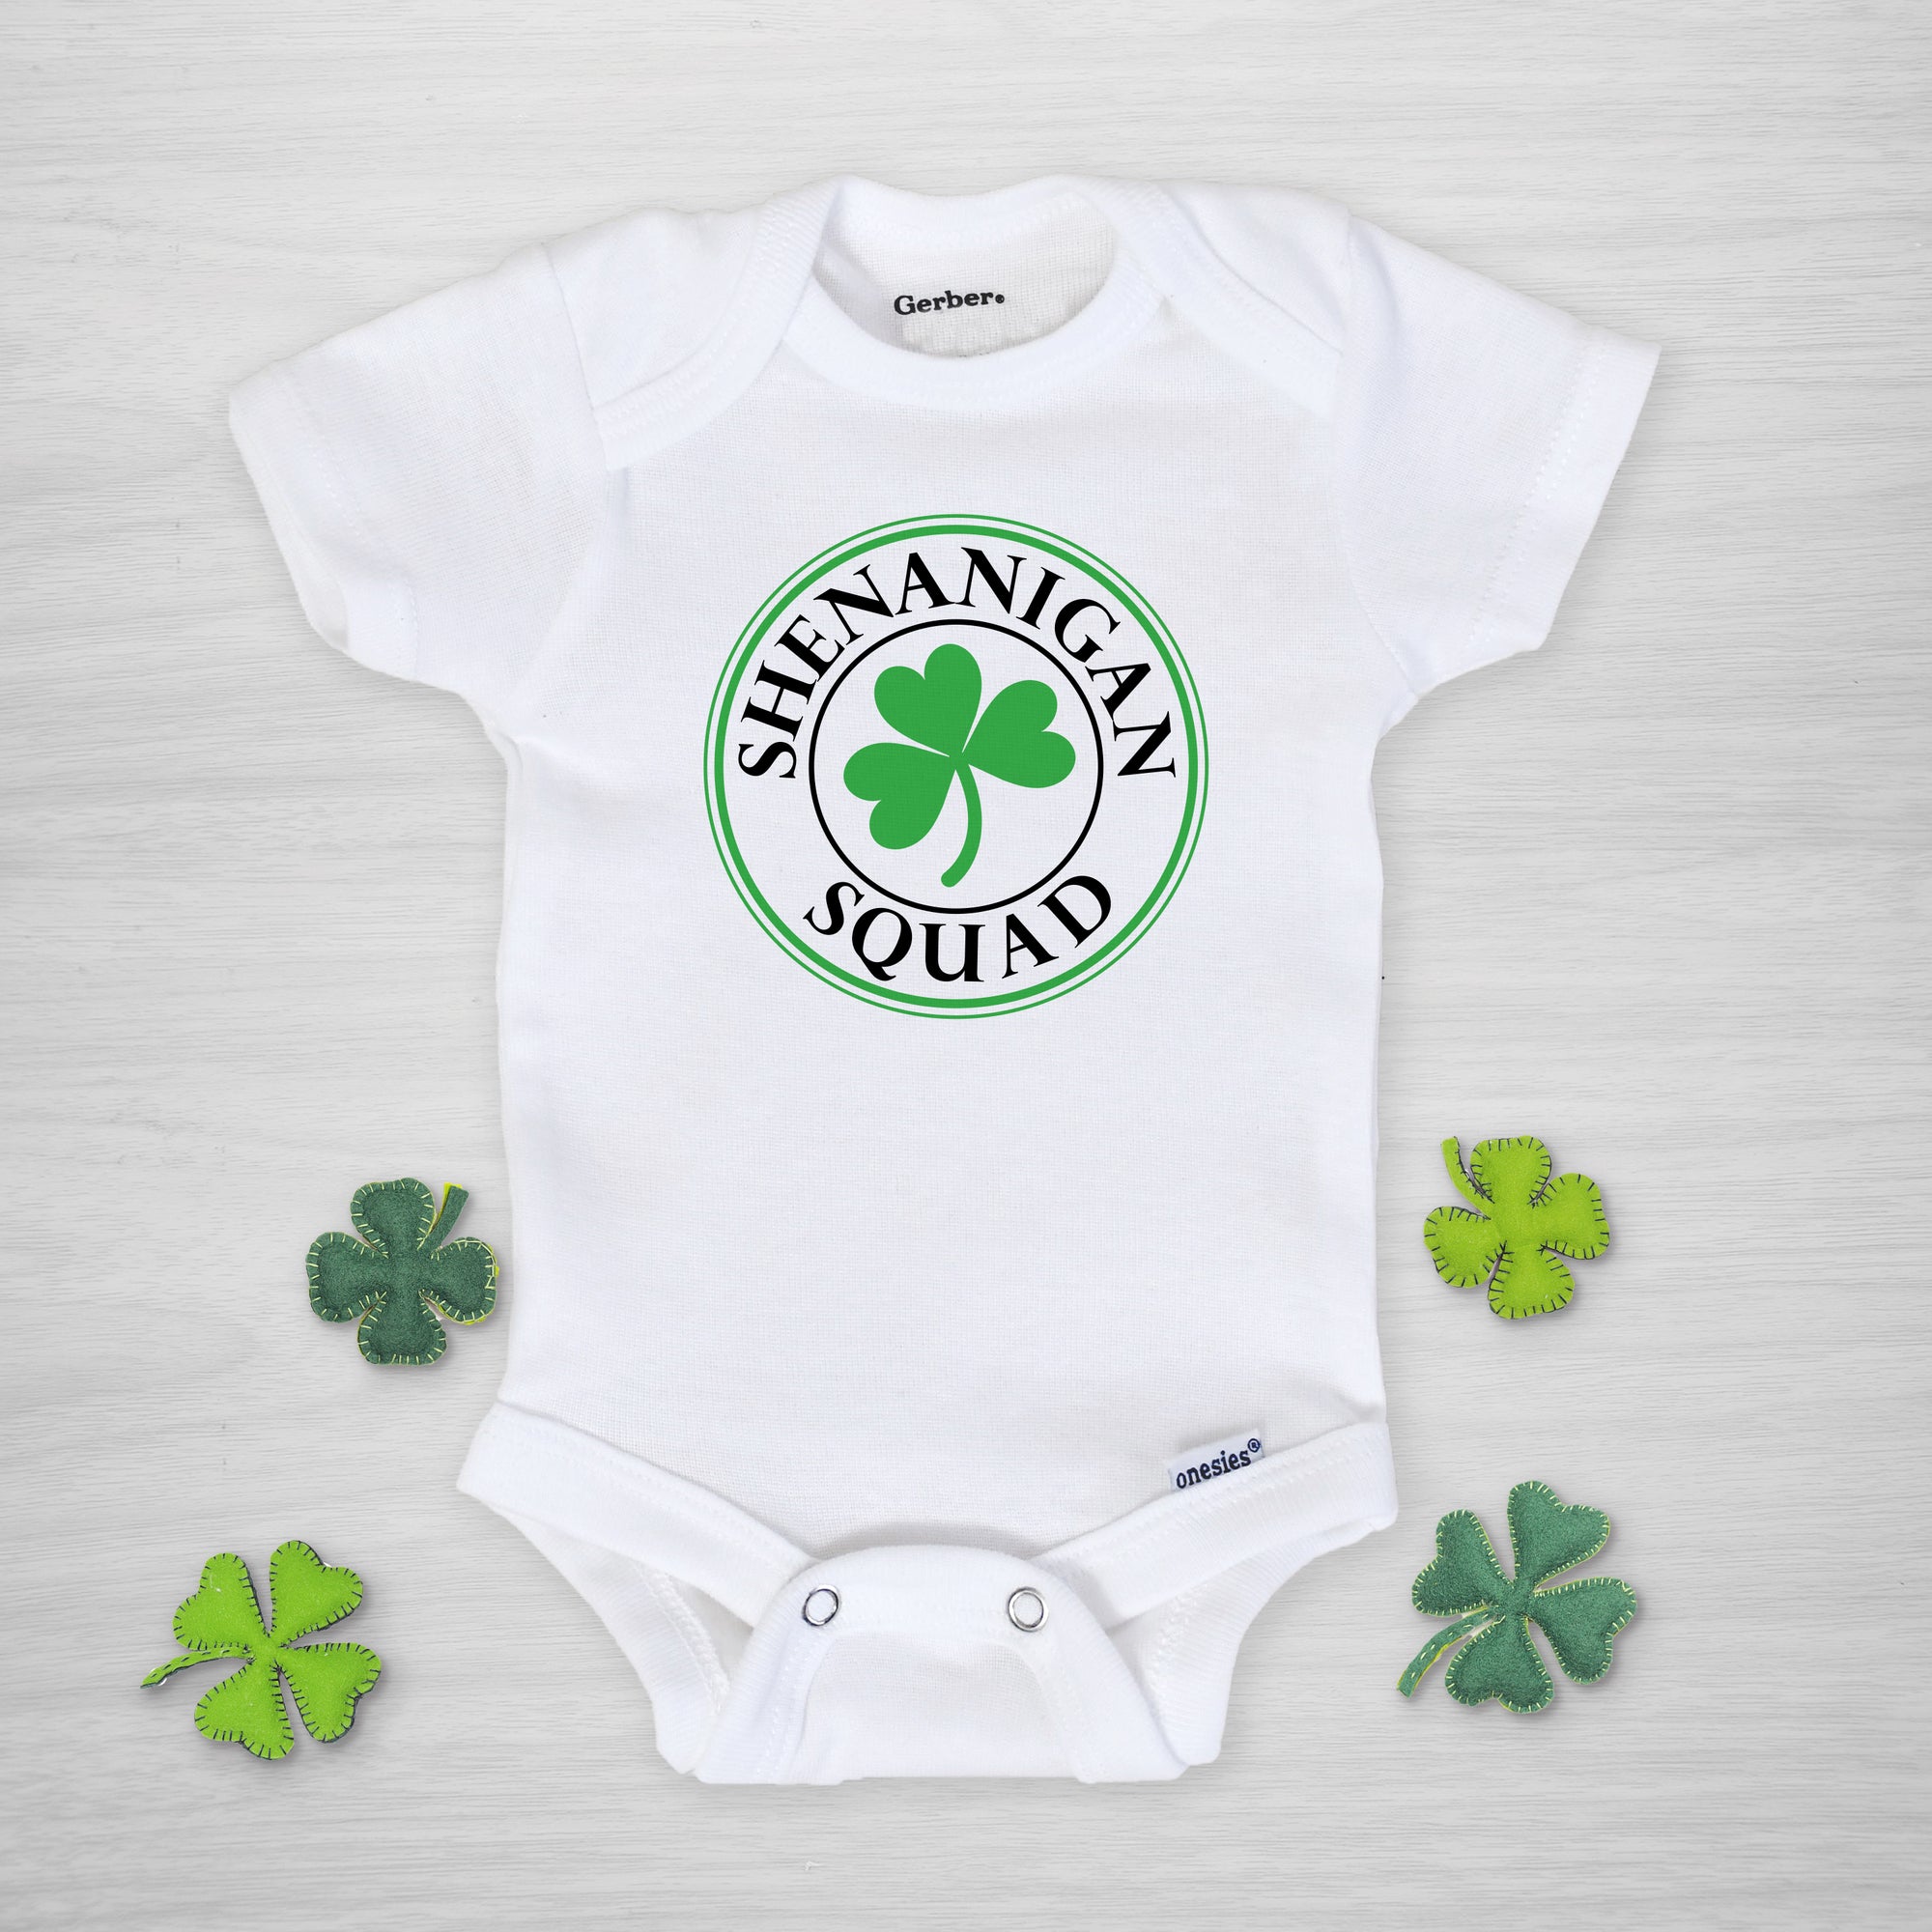 Shenanigan Squad Gerber Onesie® with shamrock, long sleeved, for St. Patrick's Day